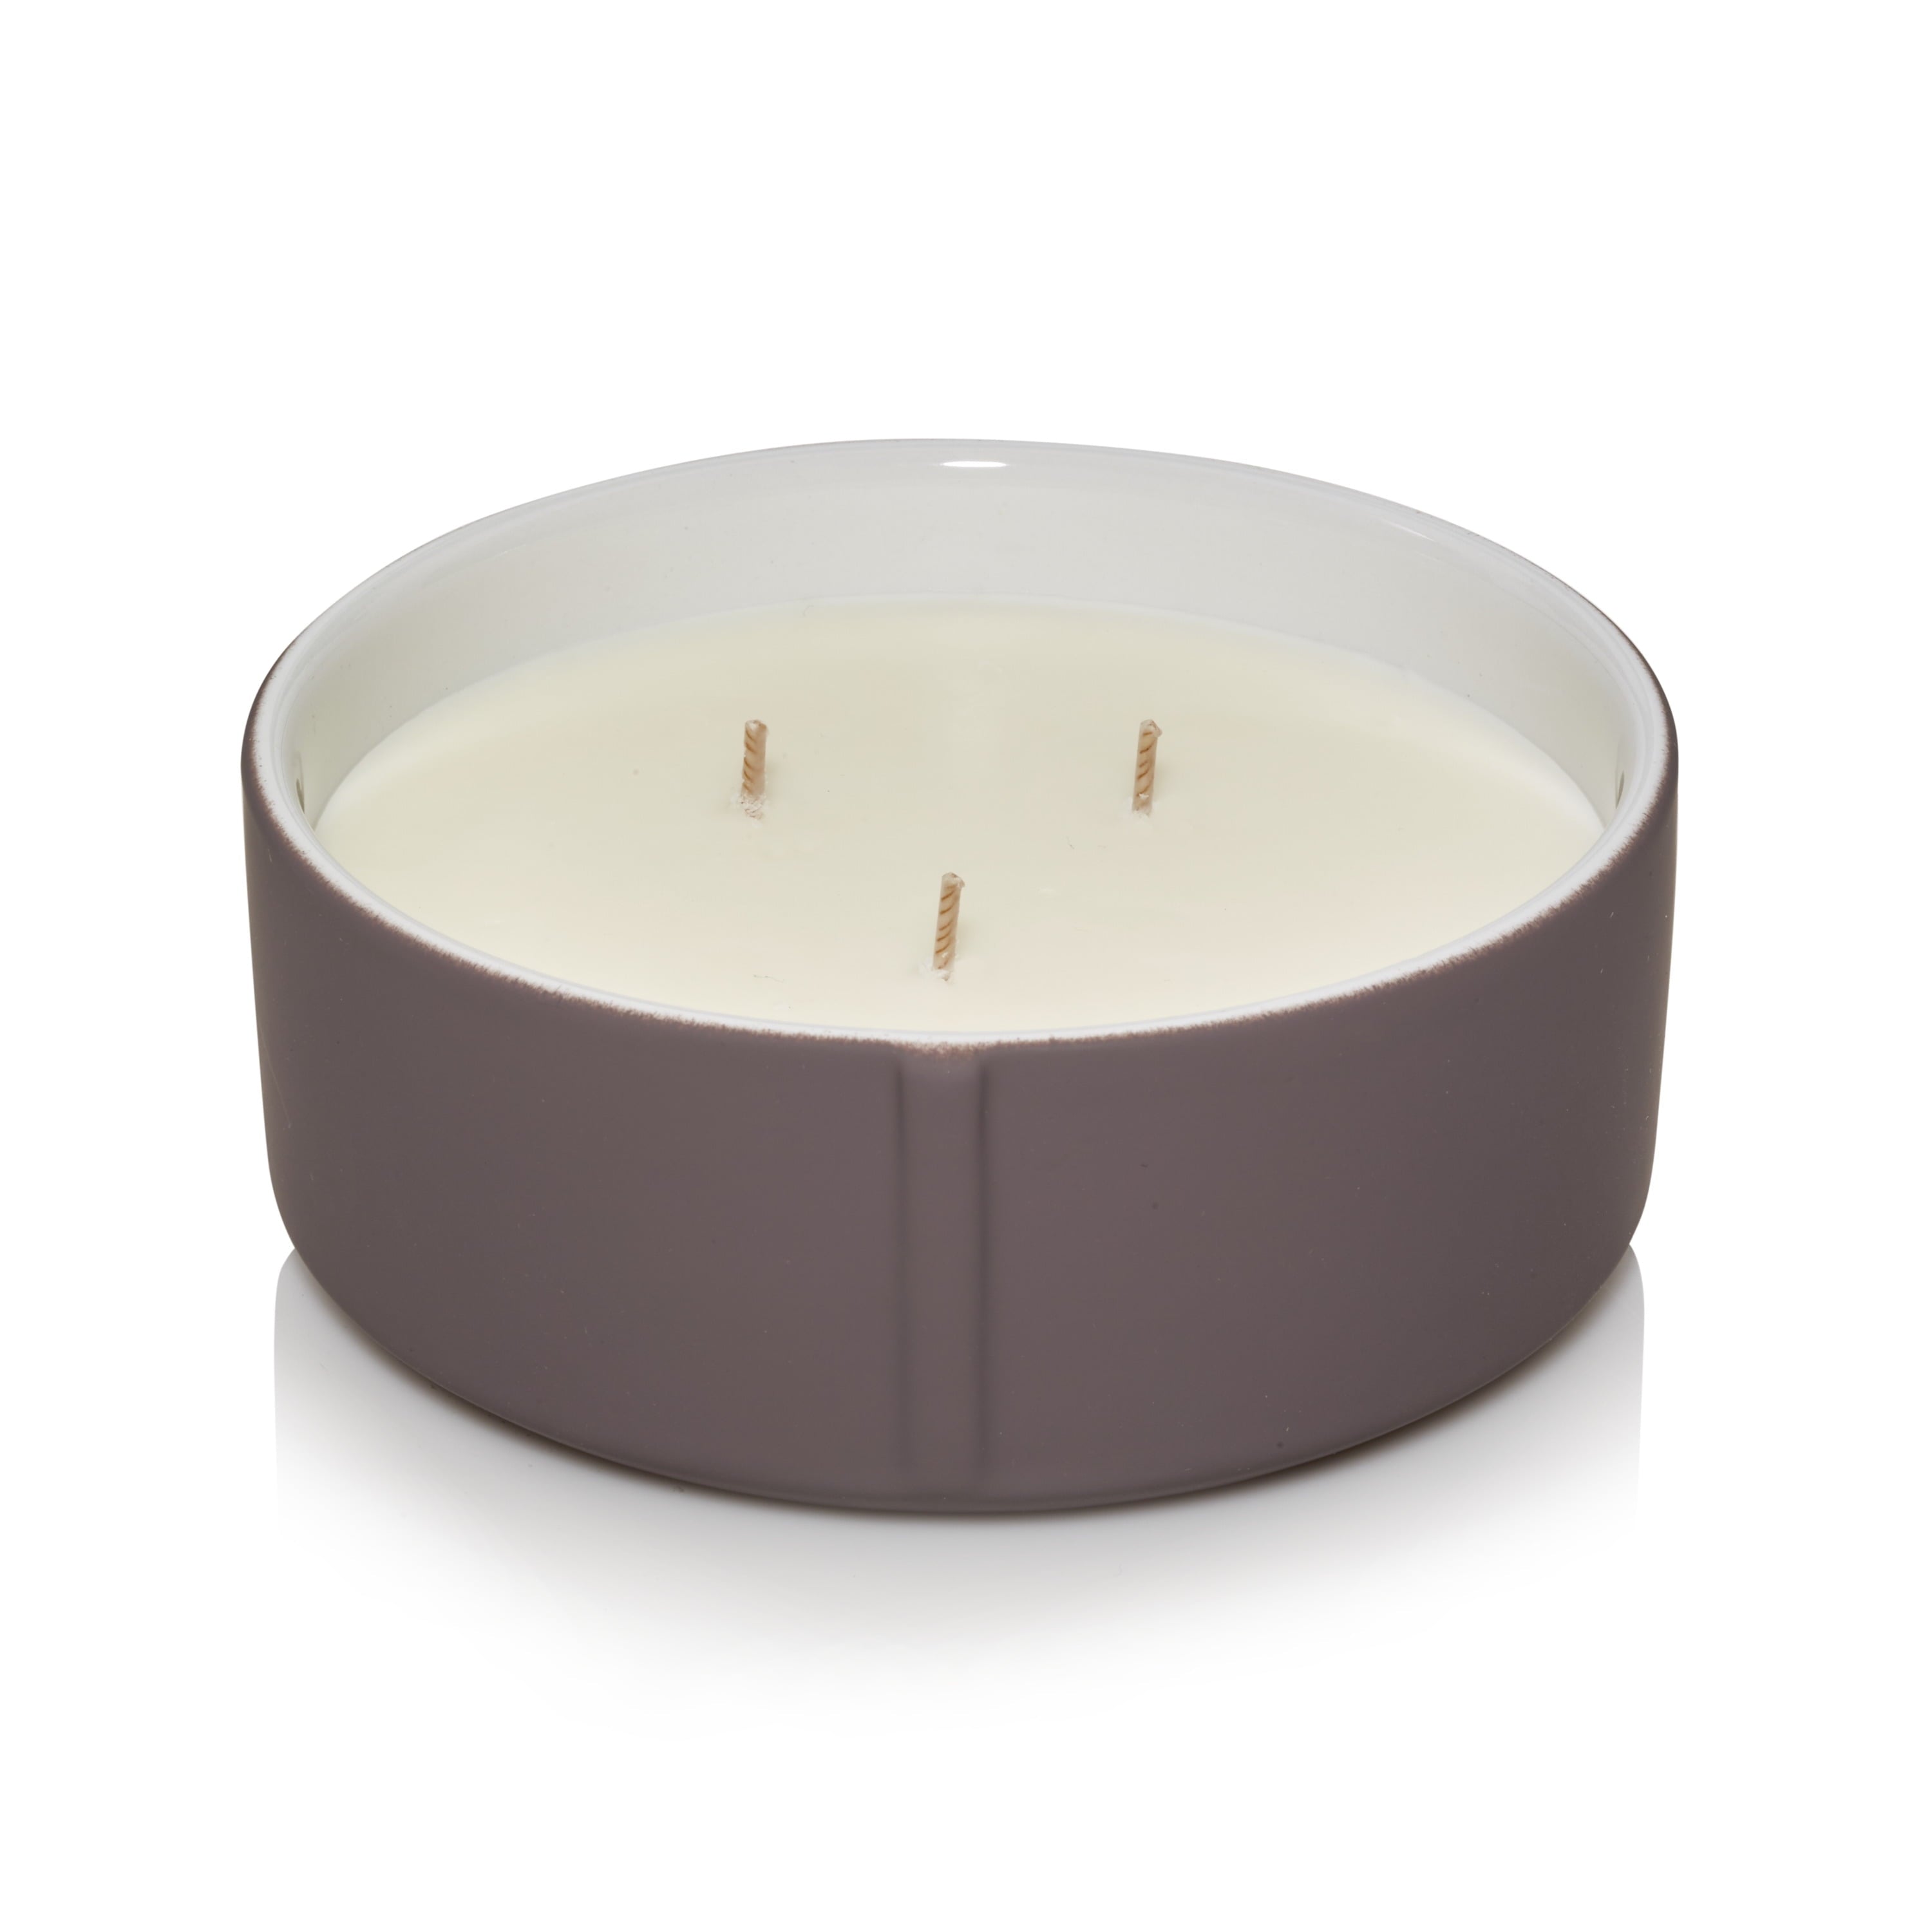 Chesapeake Bay Candle Minimalist Collection Lavender Mint - 14.9oz Soft-Touch 3-Wick Ceramic Candle